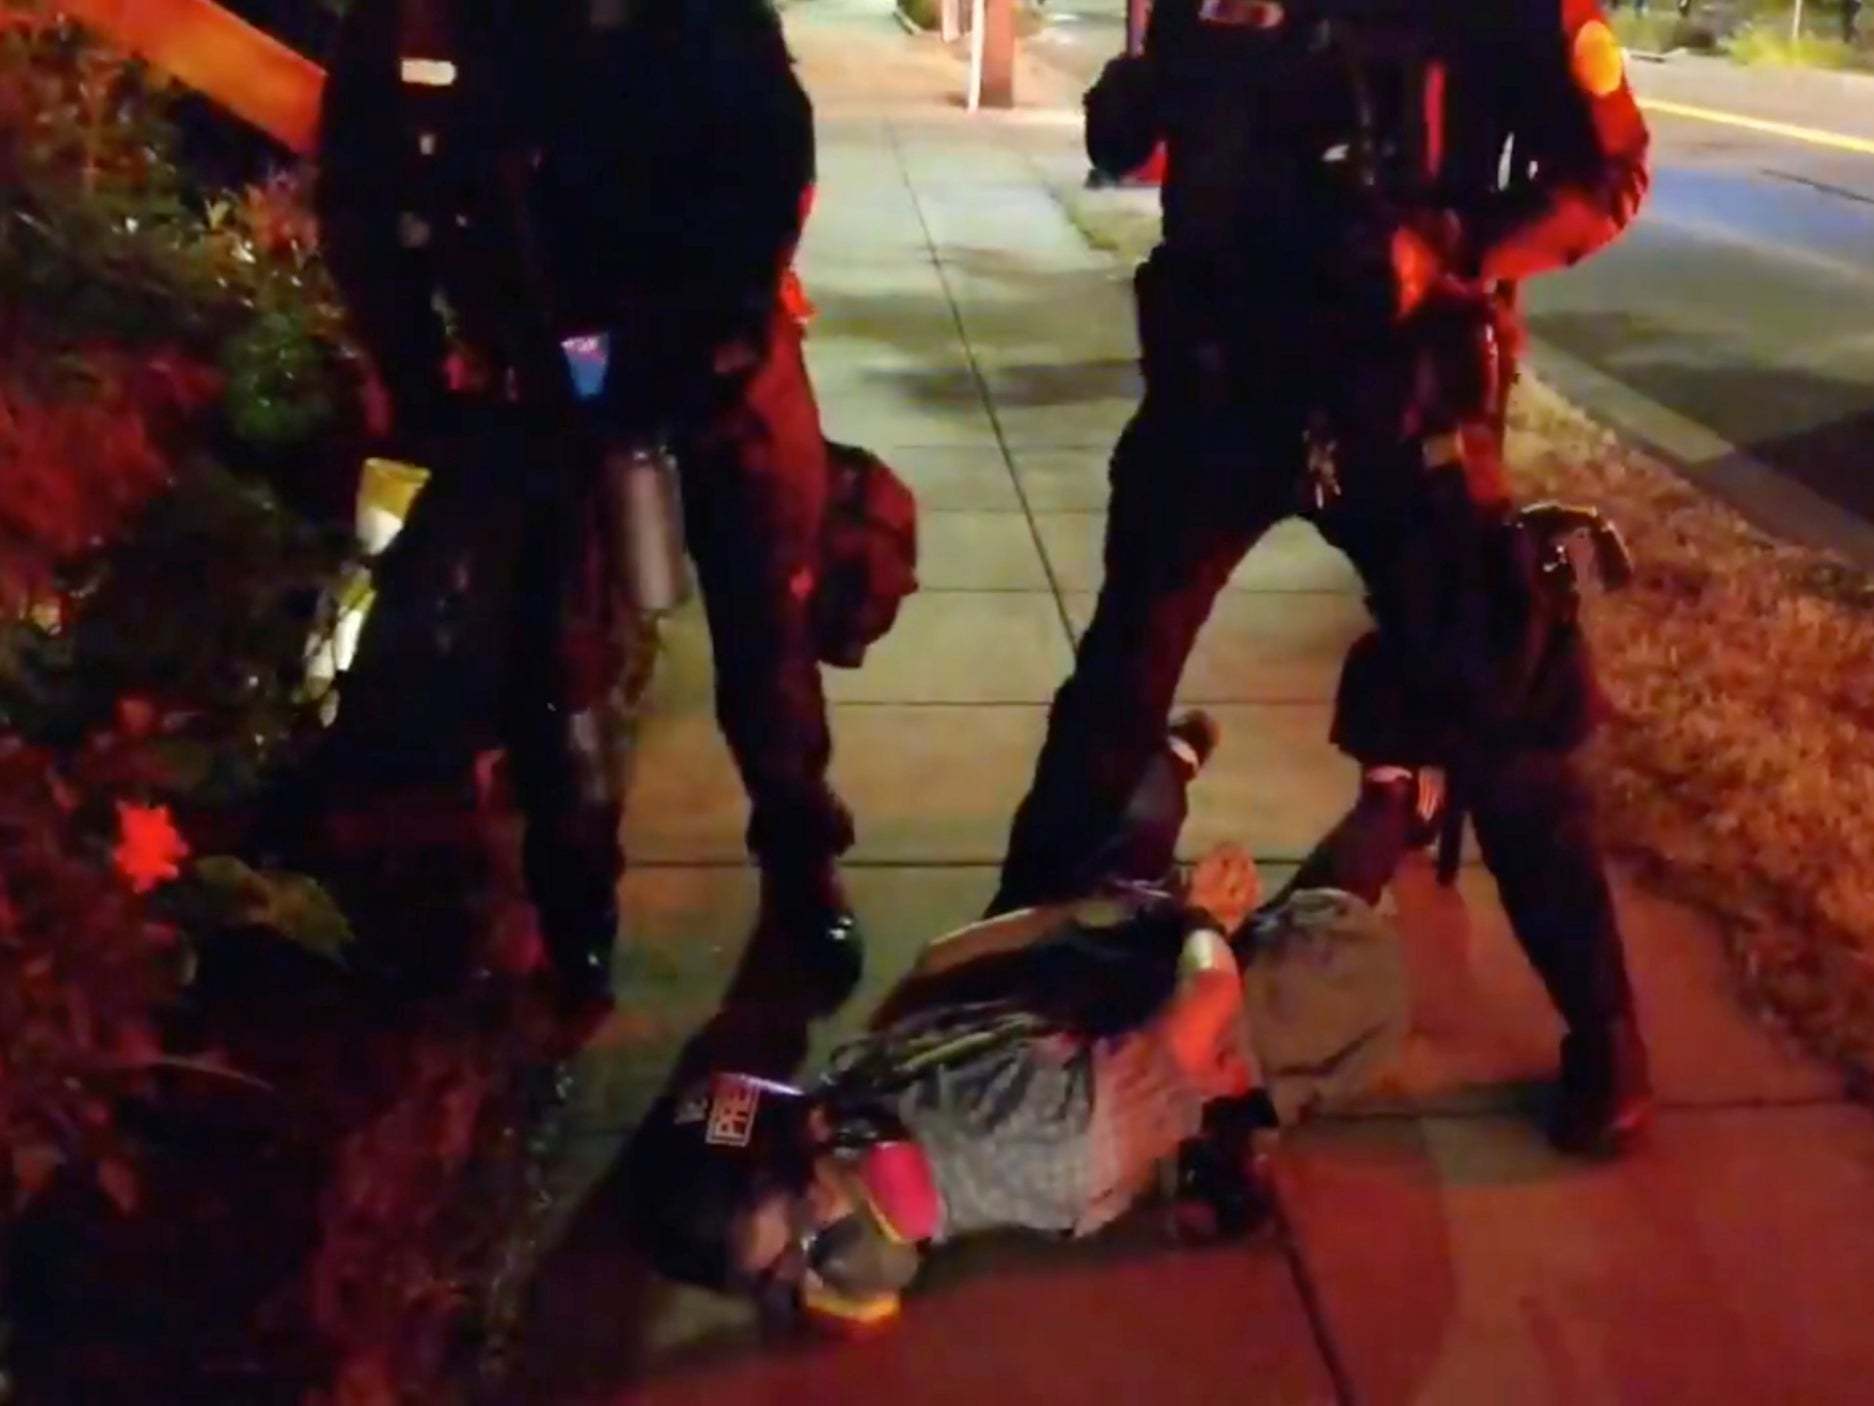 Journalist Justin Yau lies handcuffed on the ground with police officers standing over him at a demonstration in Portland, Oregon